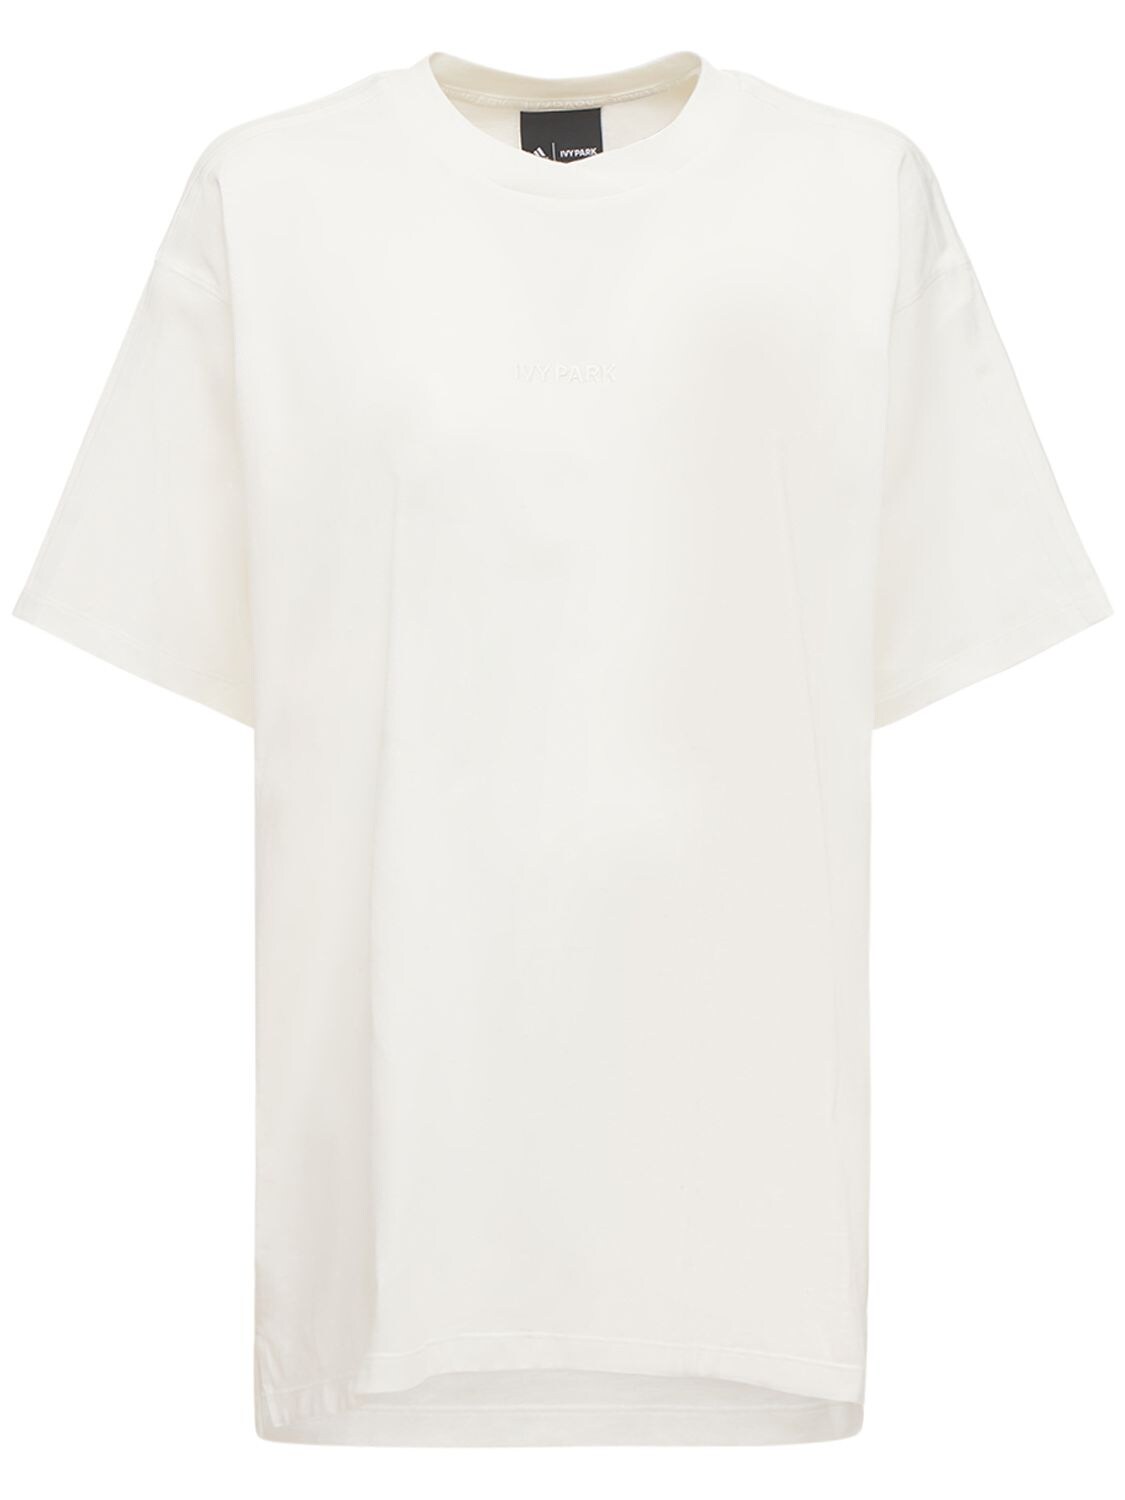 Adidas X Ivy Park 4all Cotton Jersey T-shirt In White